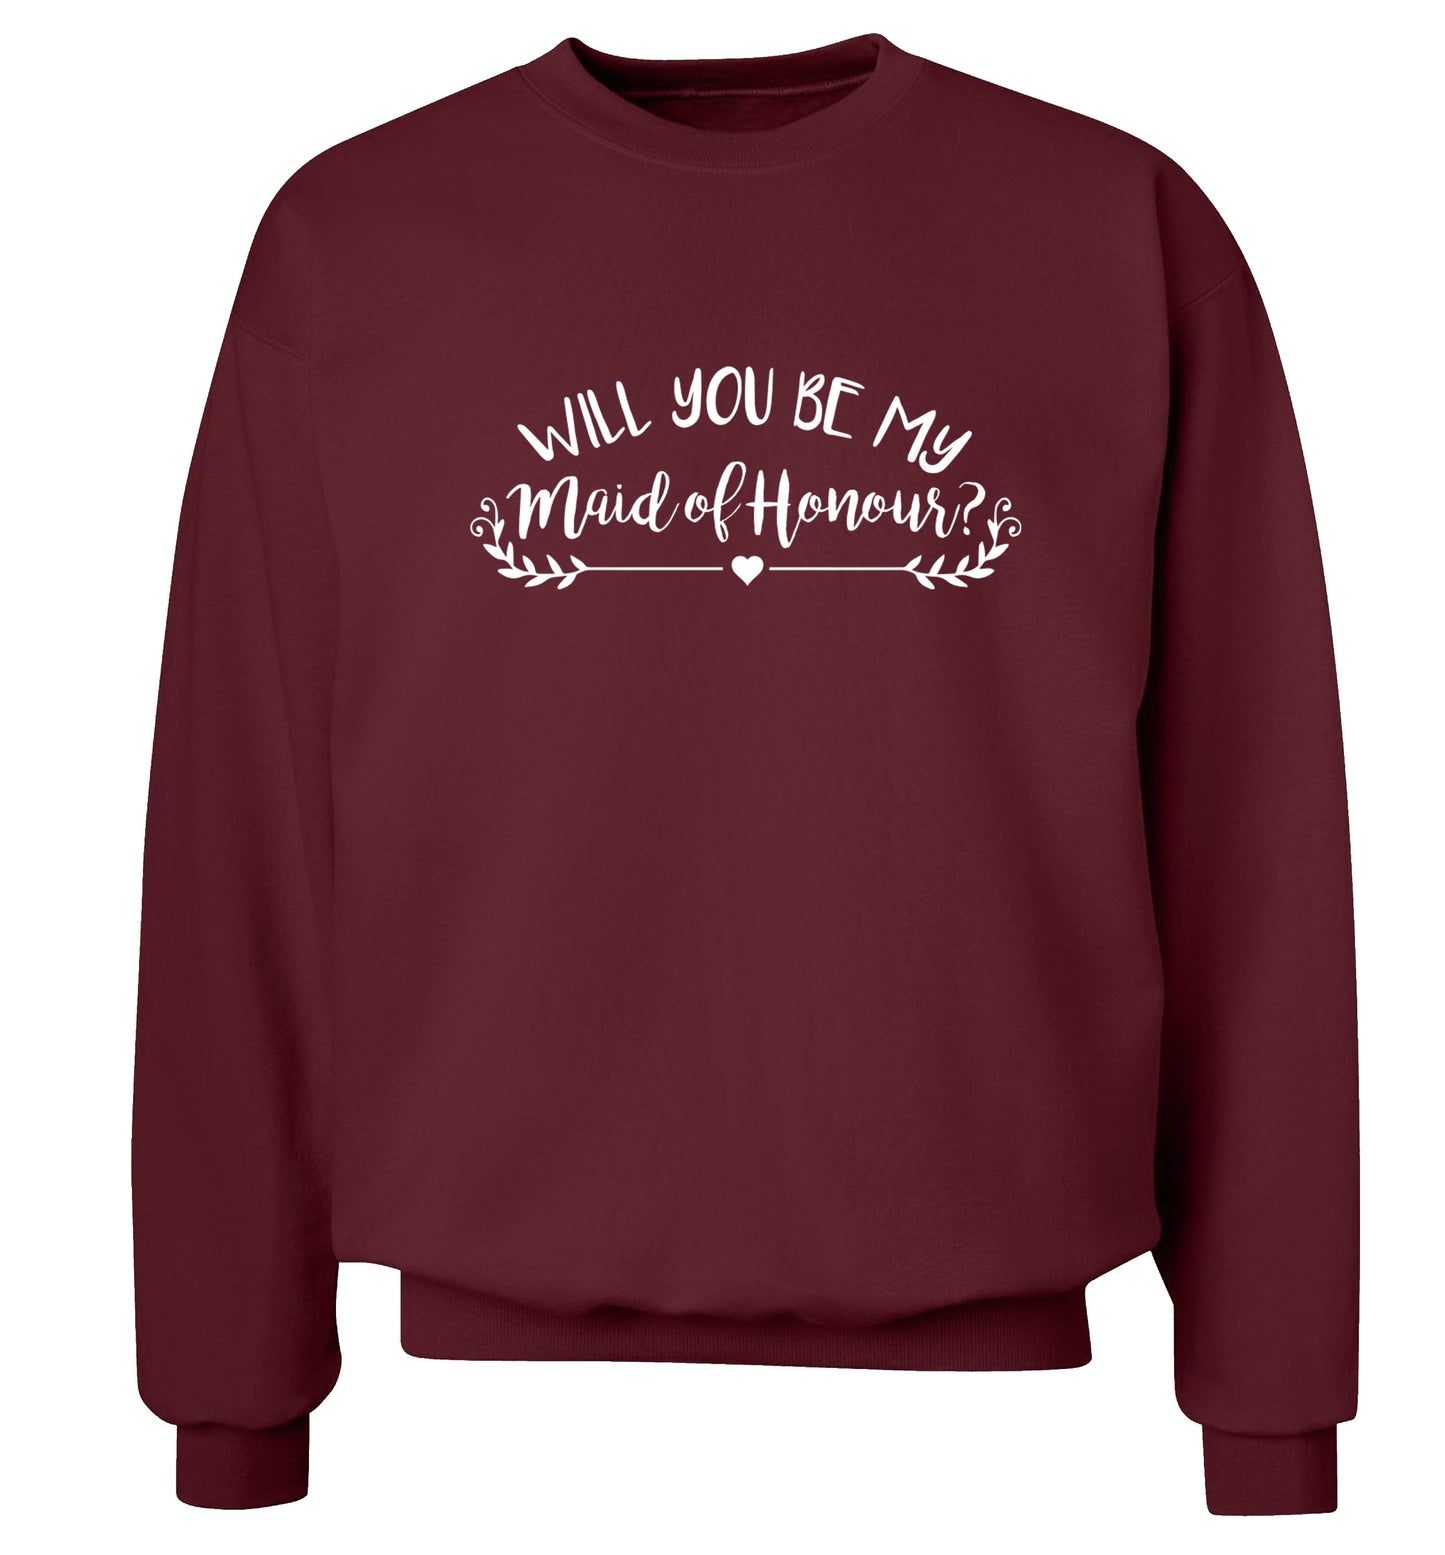 Will you be my maid of honour? Adult's unisex maroon Sweater 2XL